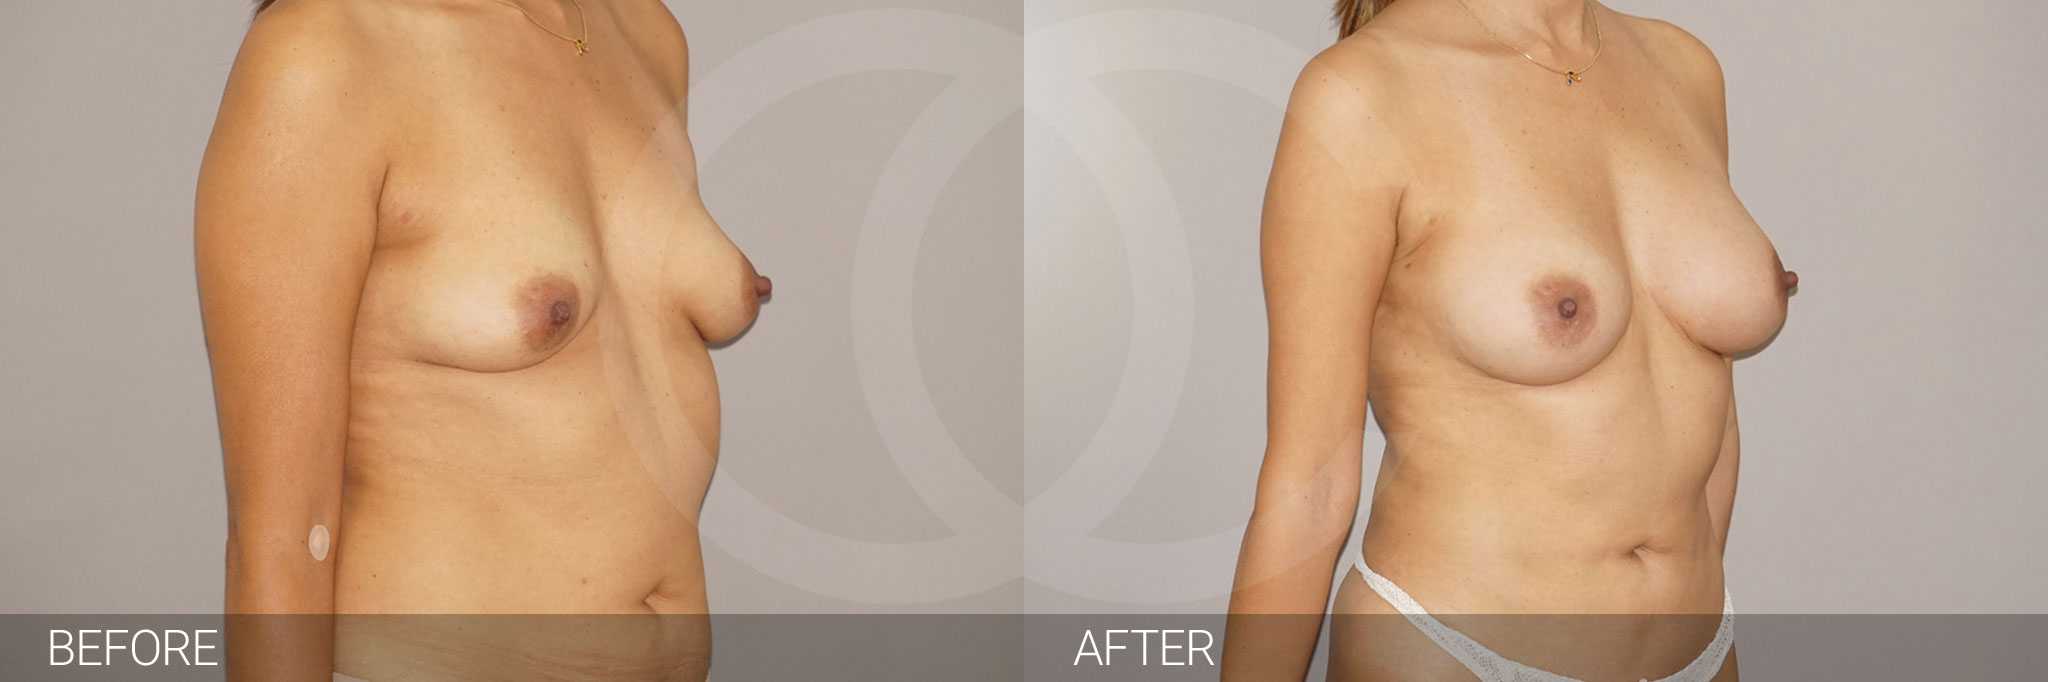 fat transfer to the breasts photo before and after